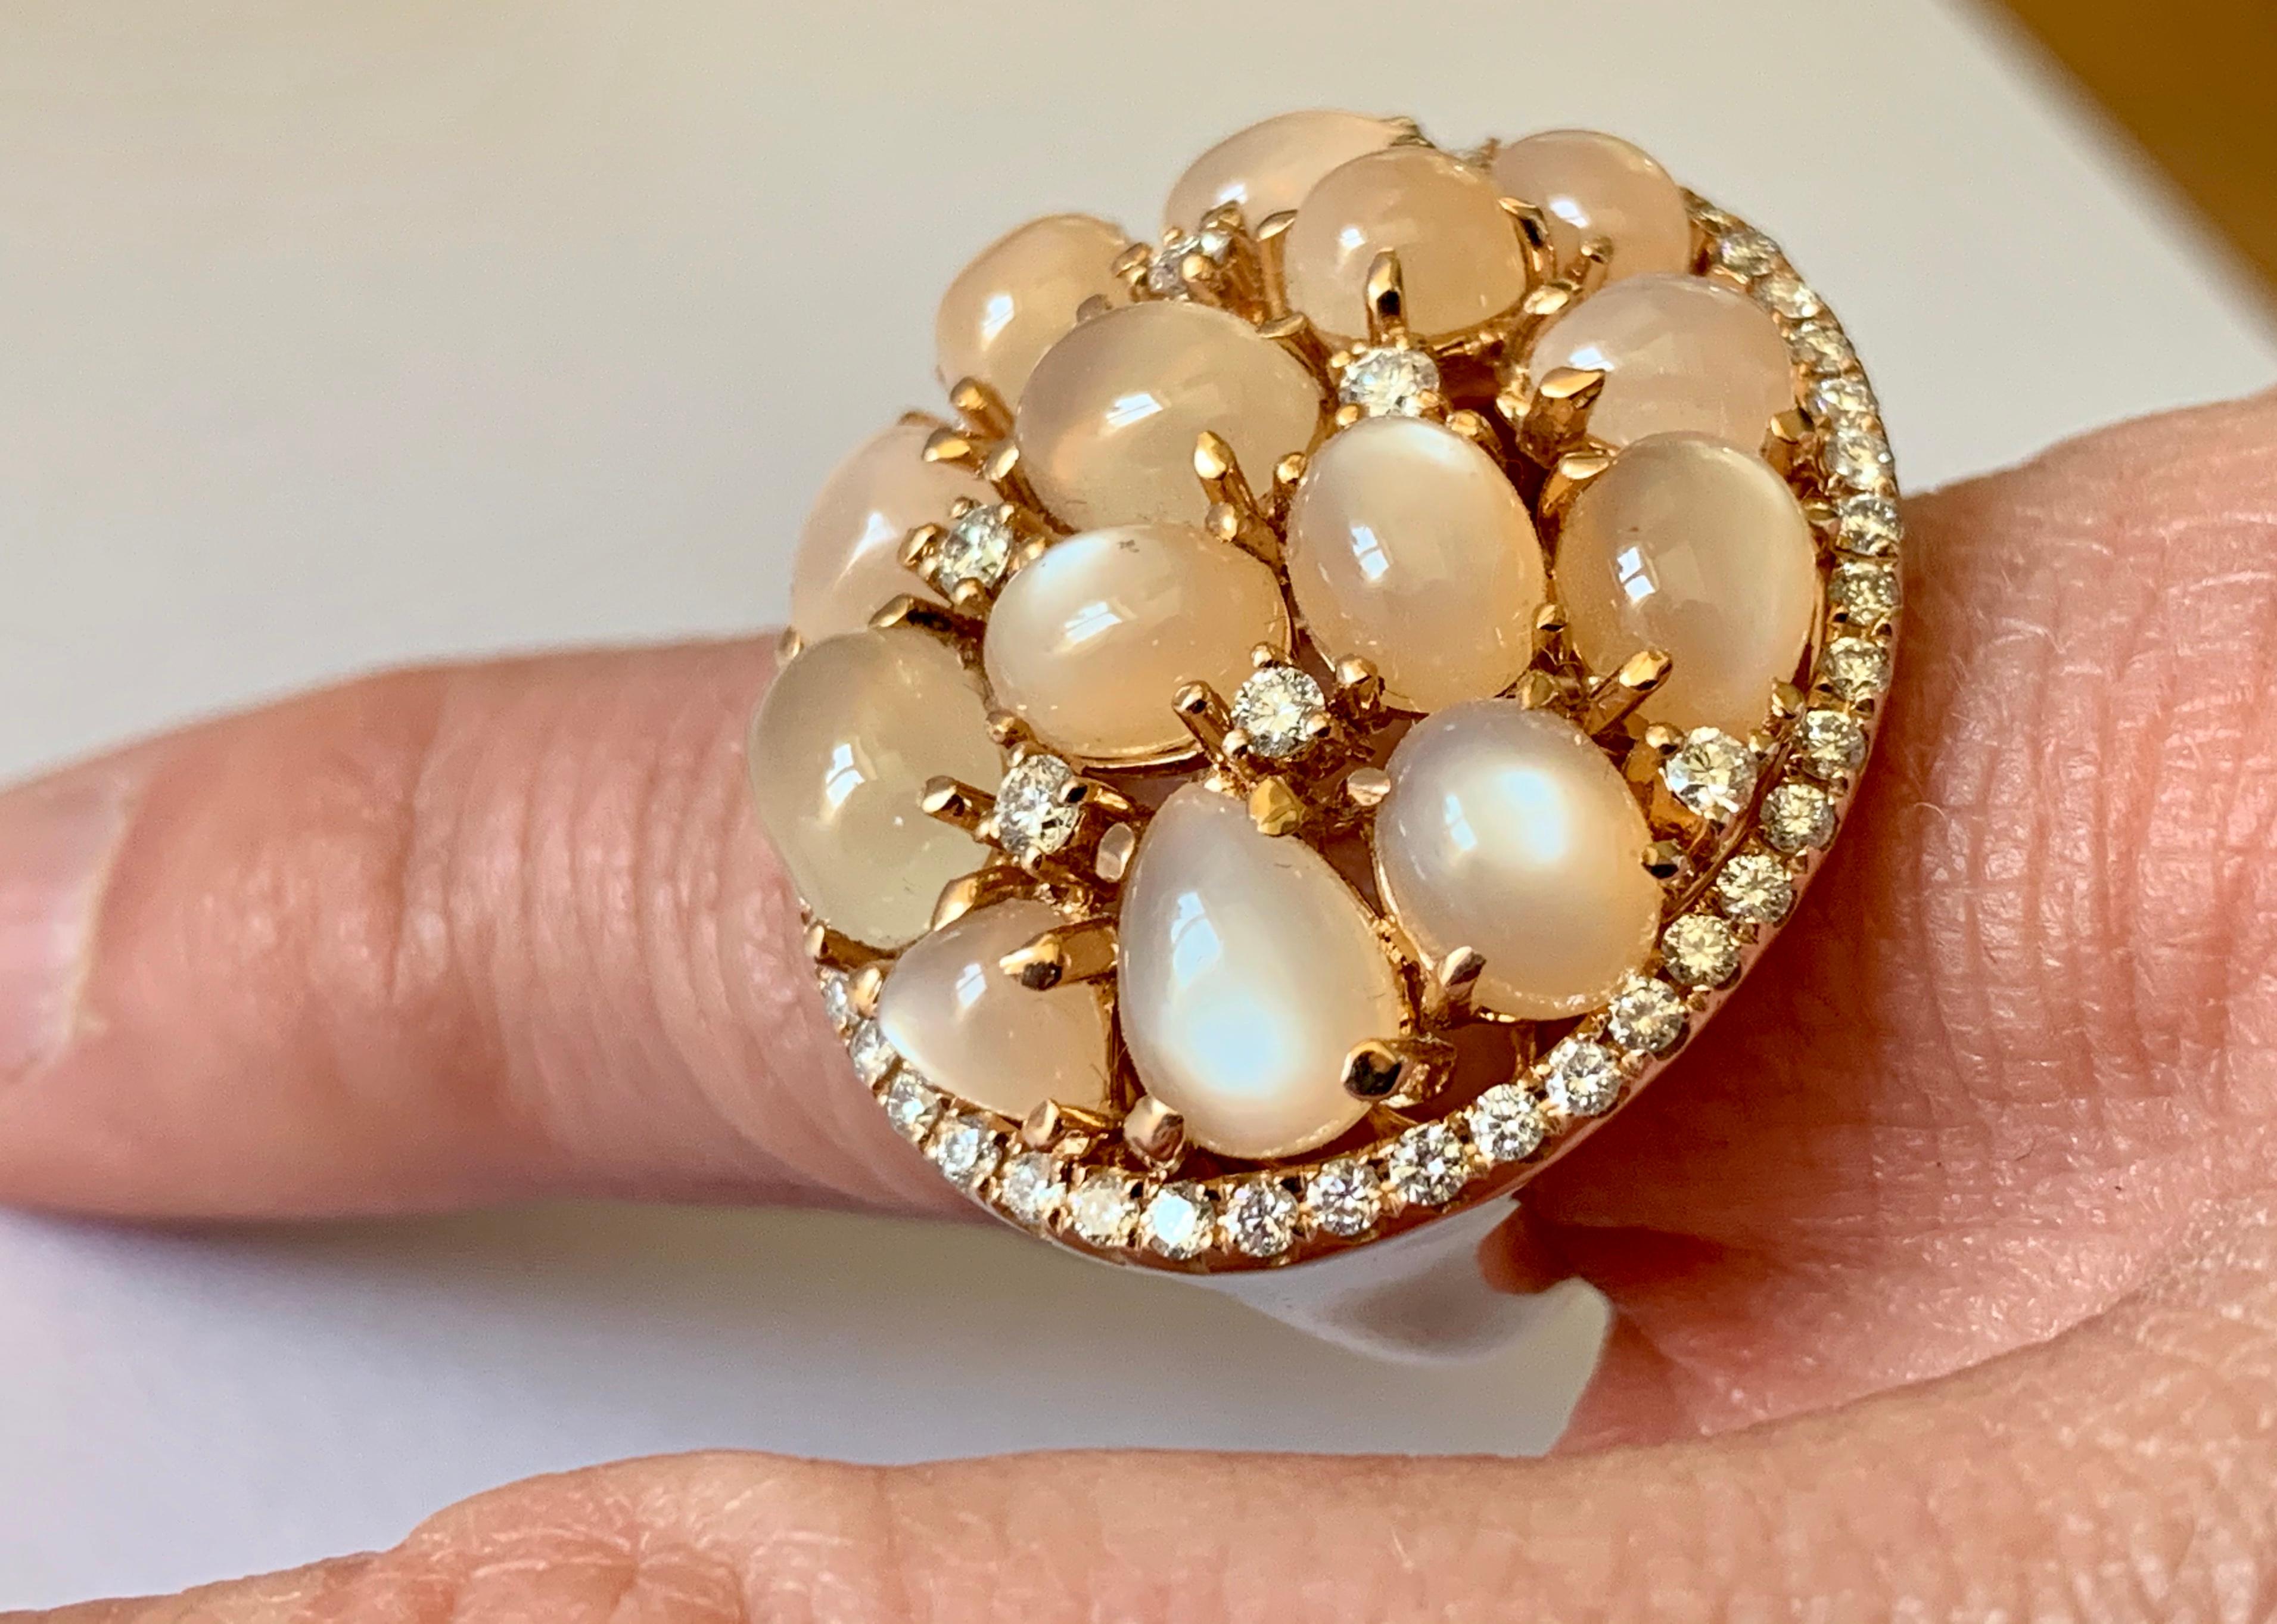 Unusual 18 K Rose Gold Ring set with 14 brownish labardorescent Moonstones weighing 13.02 ct and further decorated with 52  brilliant cut Diamonds weighing 0.94 ct. 
The ring is currently size 54/14 but can be resized larger or smaller if necessary.